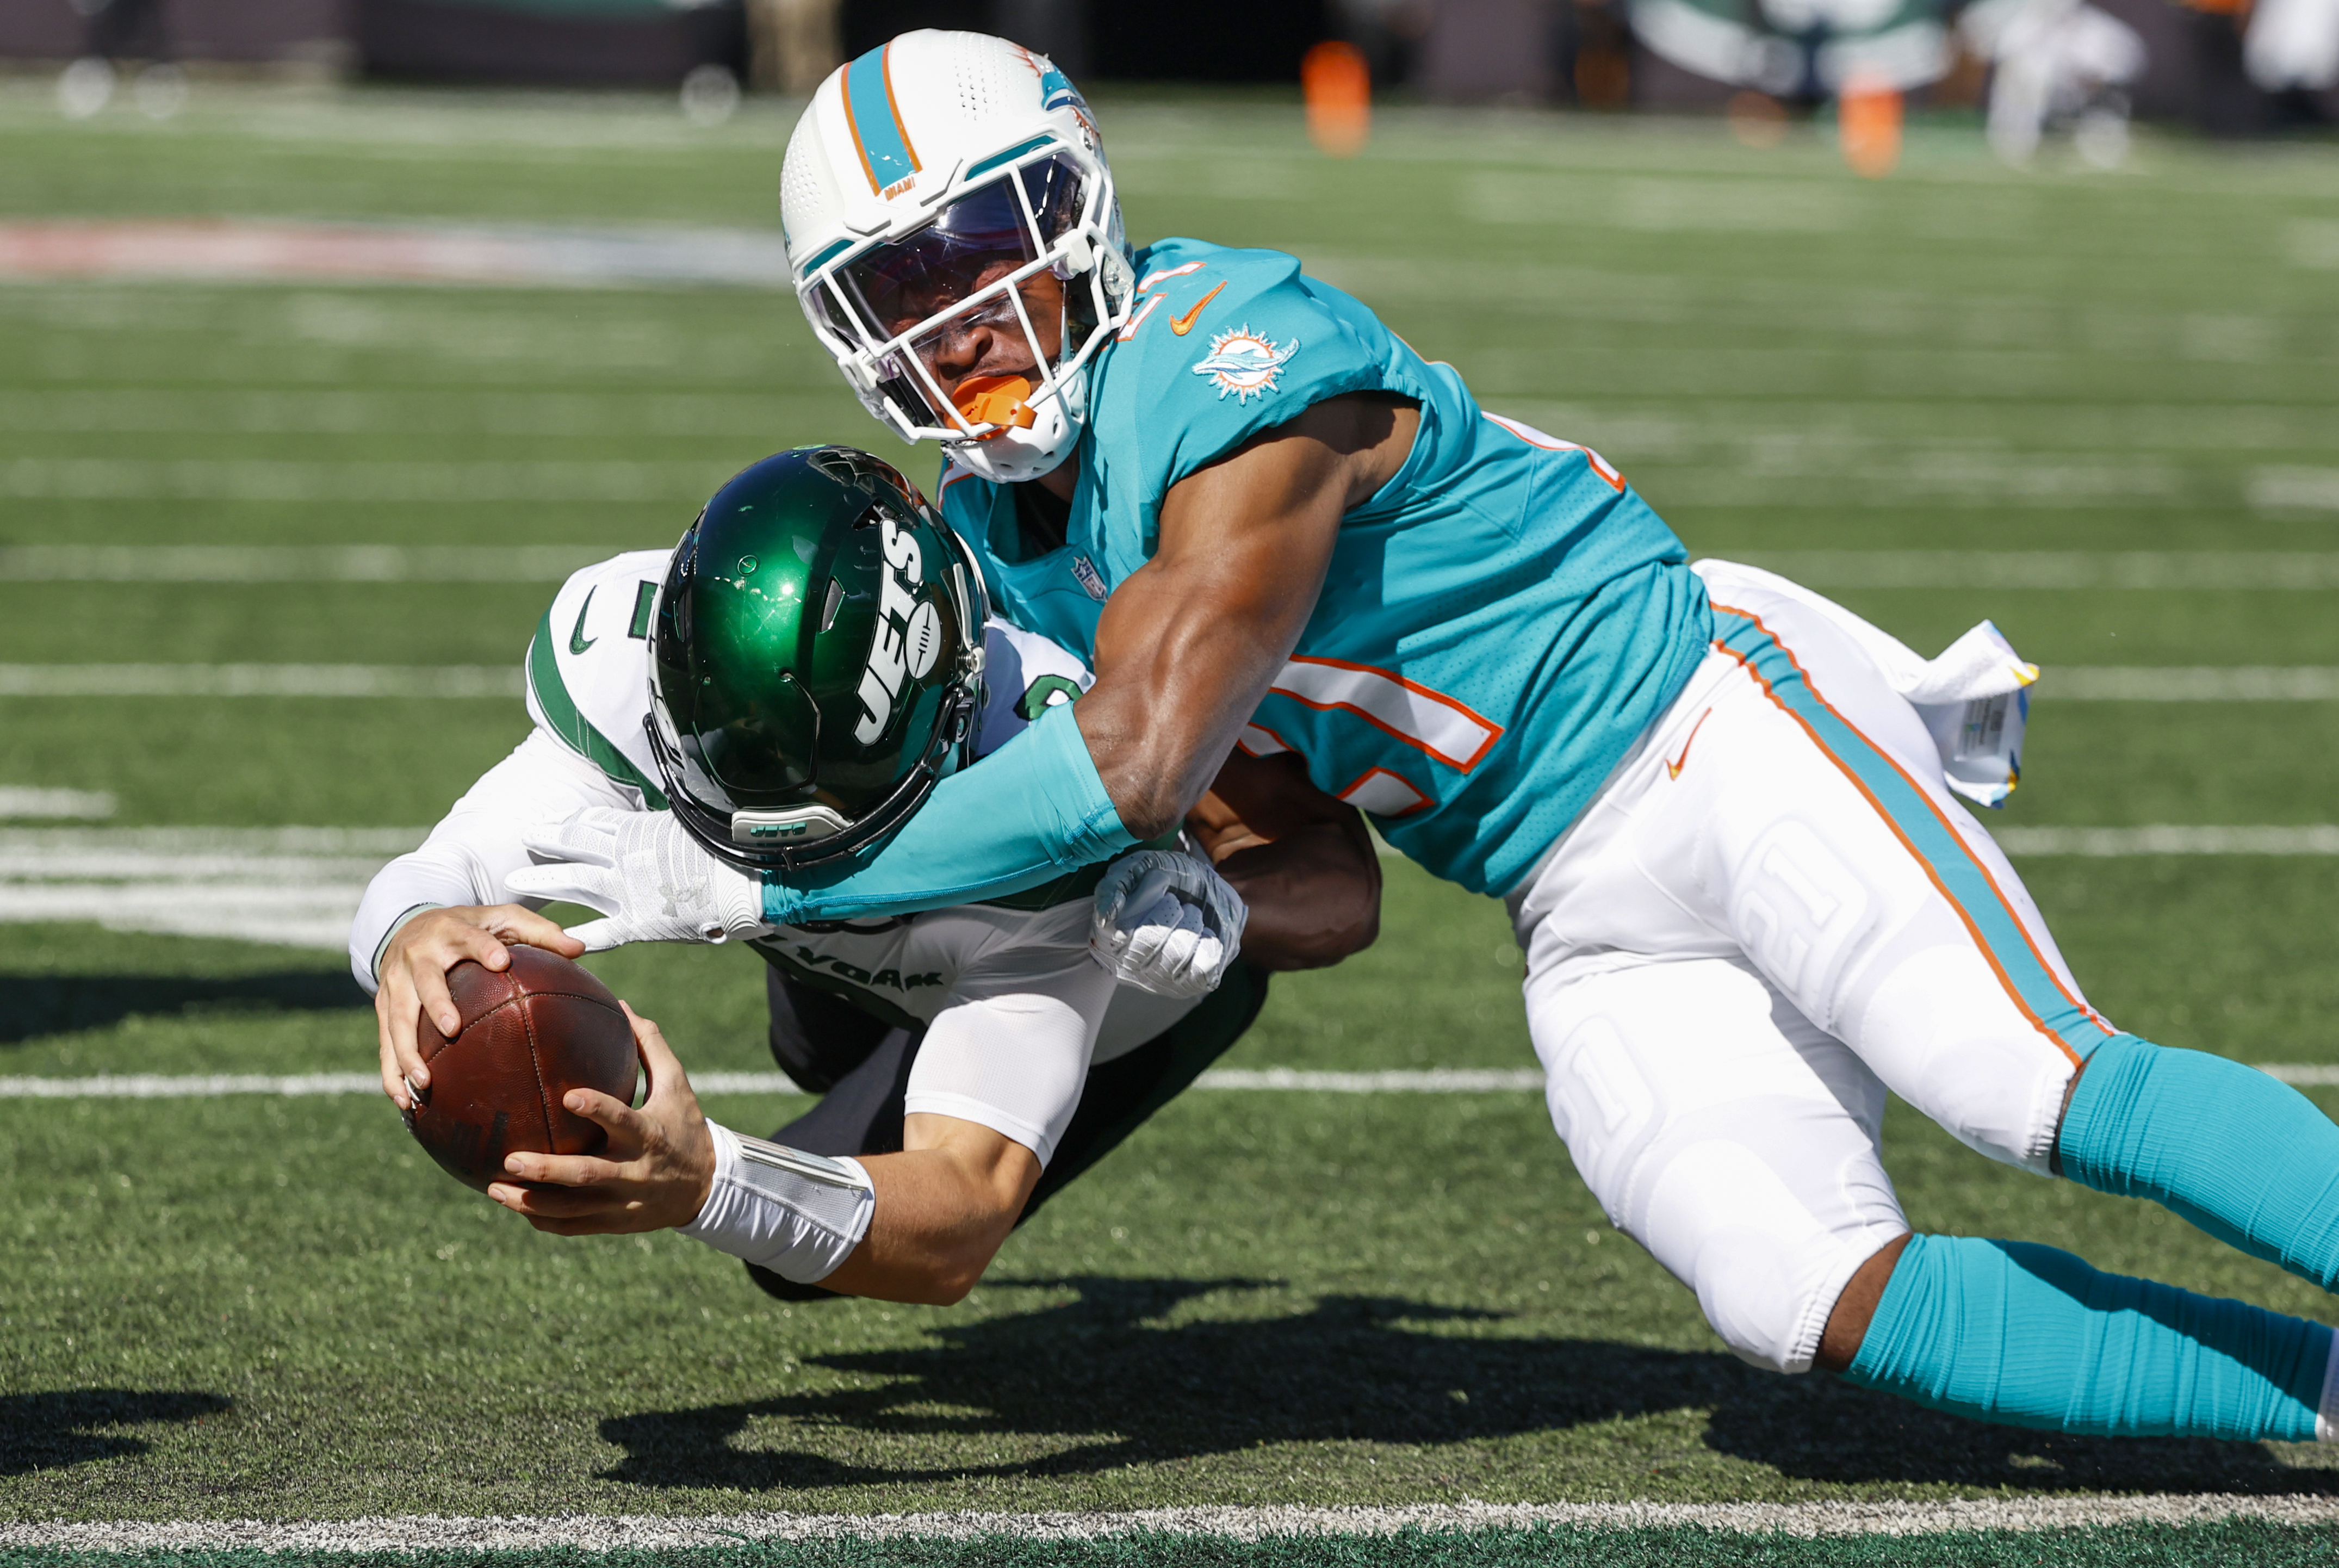 Miami Dolphins-New York Jets Week 12 game to make NFL history as